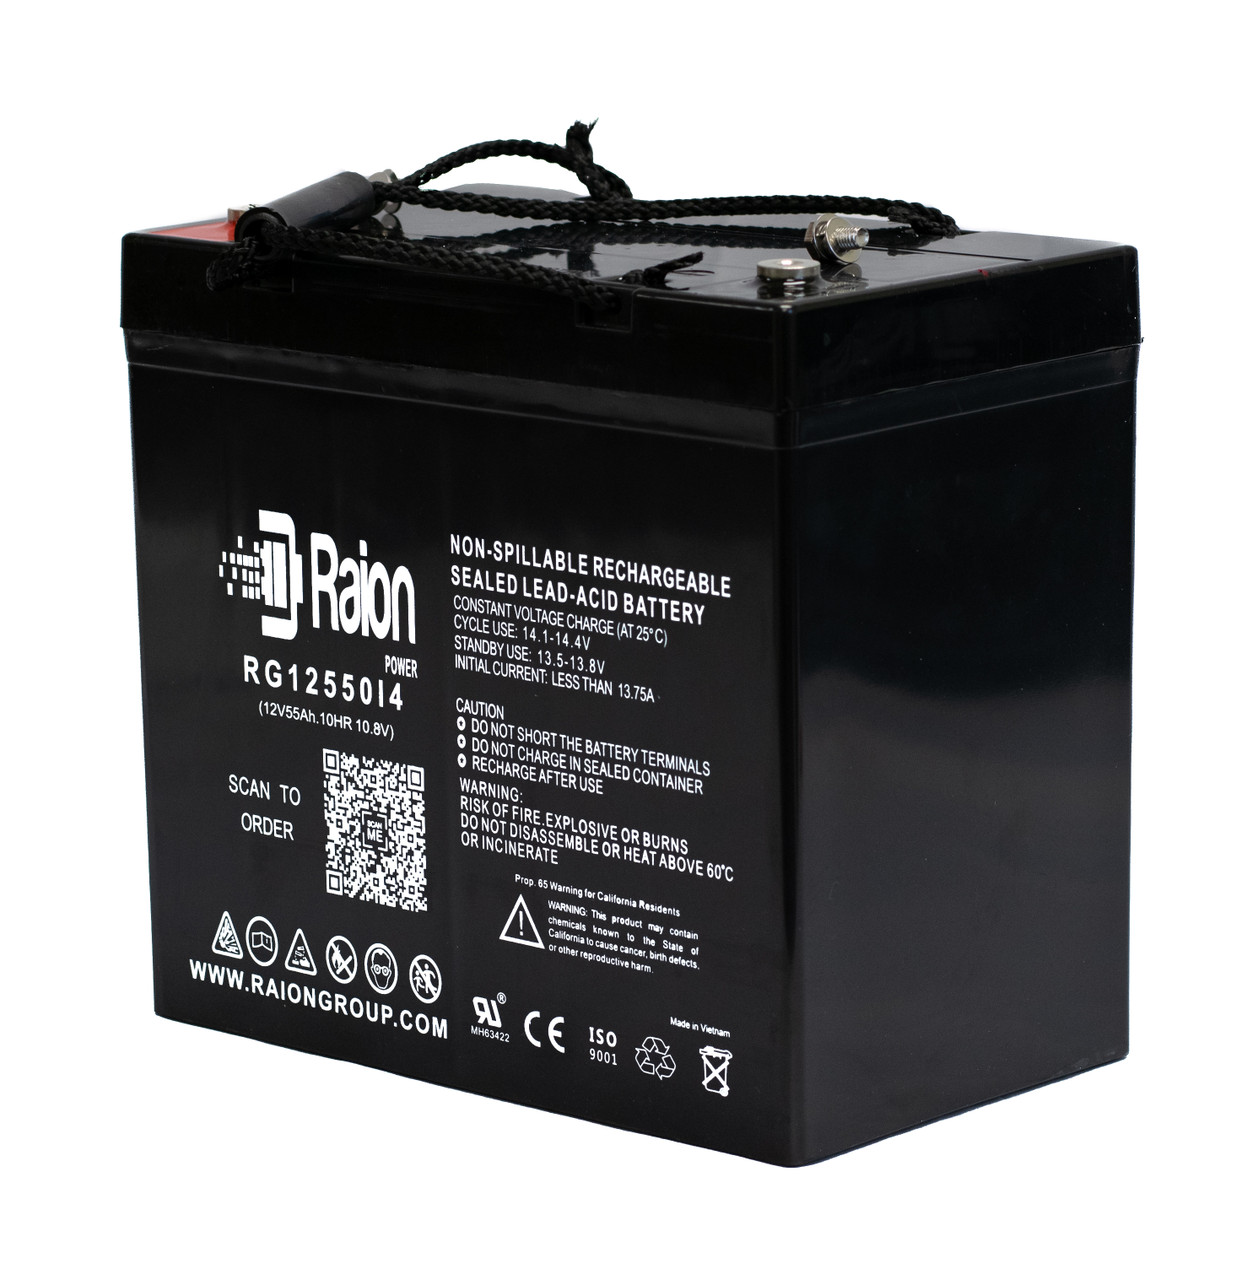 Raion Power Replacement 12V 55Ah Battery for Ritar RA12-55 - 1 Pack